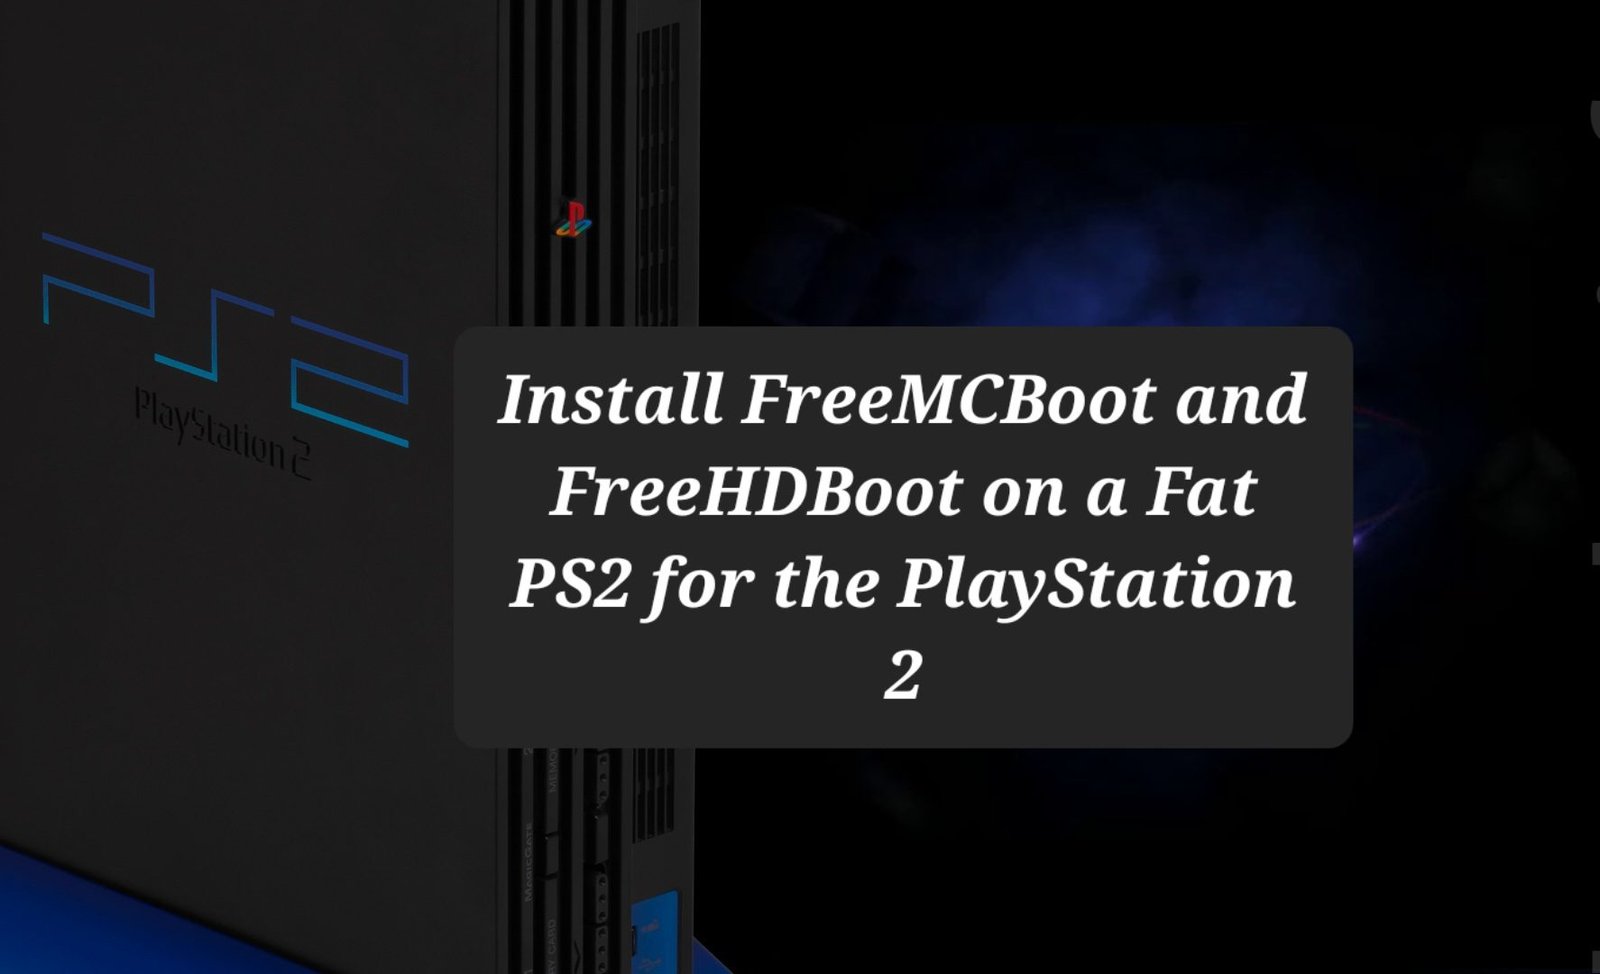 Install FreeMCBoot and FreeHDBoot on a Fat PS2 for the PlayStation 2. 117